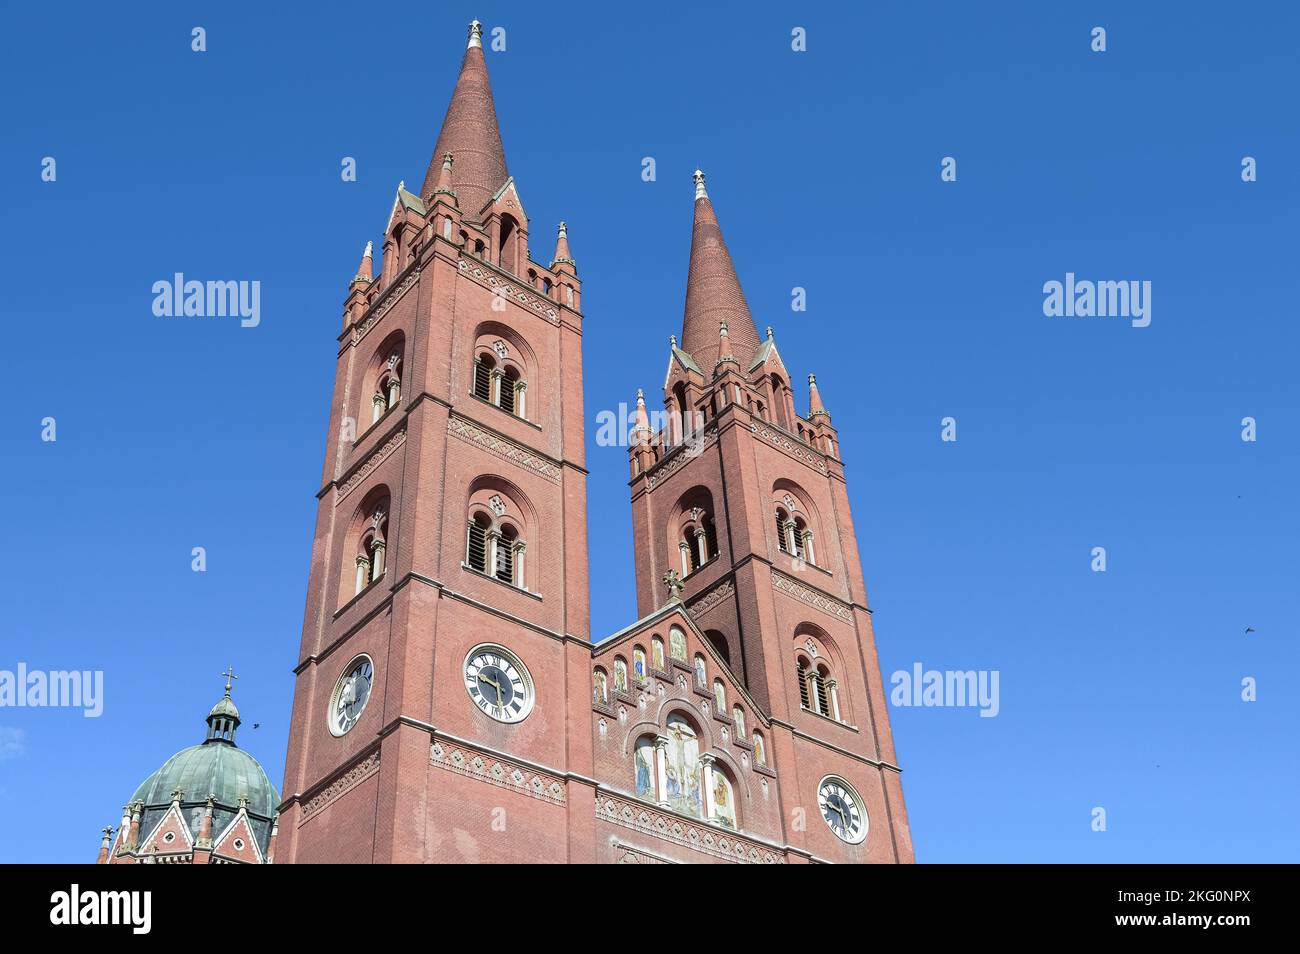 The Đakovo Cathedral or Cathedral basilica of St. Peter is the cathedral of the Roman Catholic Archdiocese of Đakovo-Osijek in Đakovo, Croatia. Stock Photo